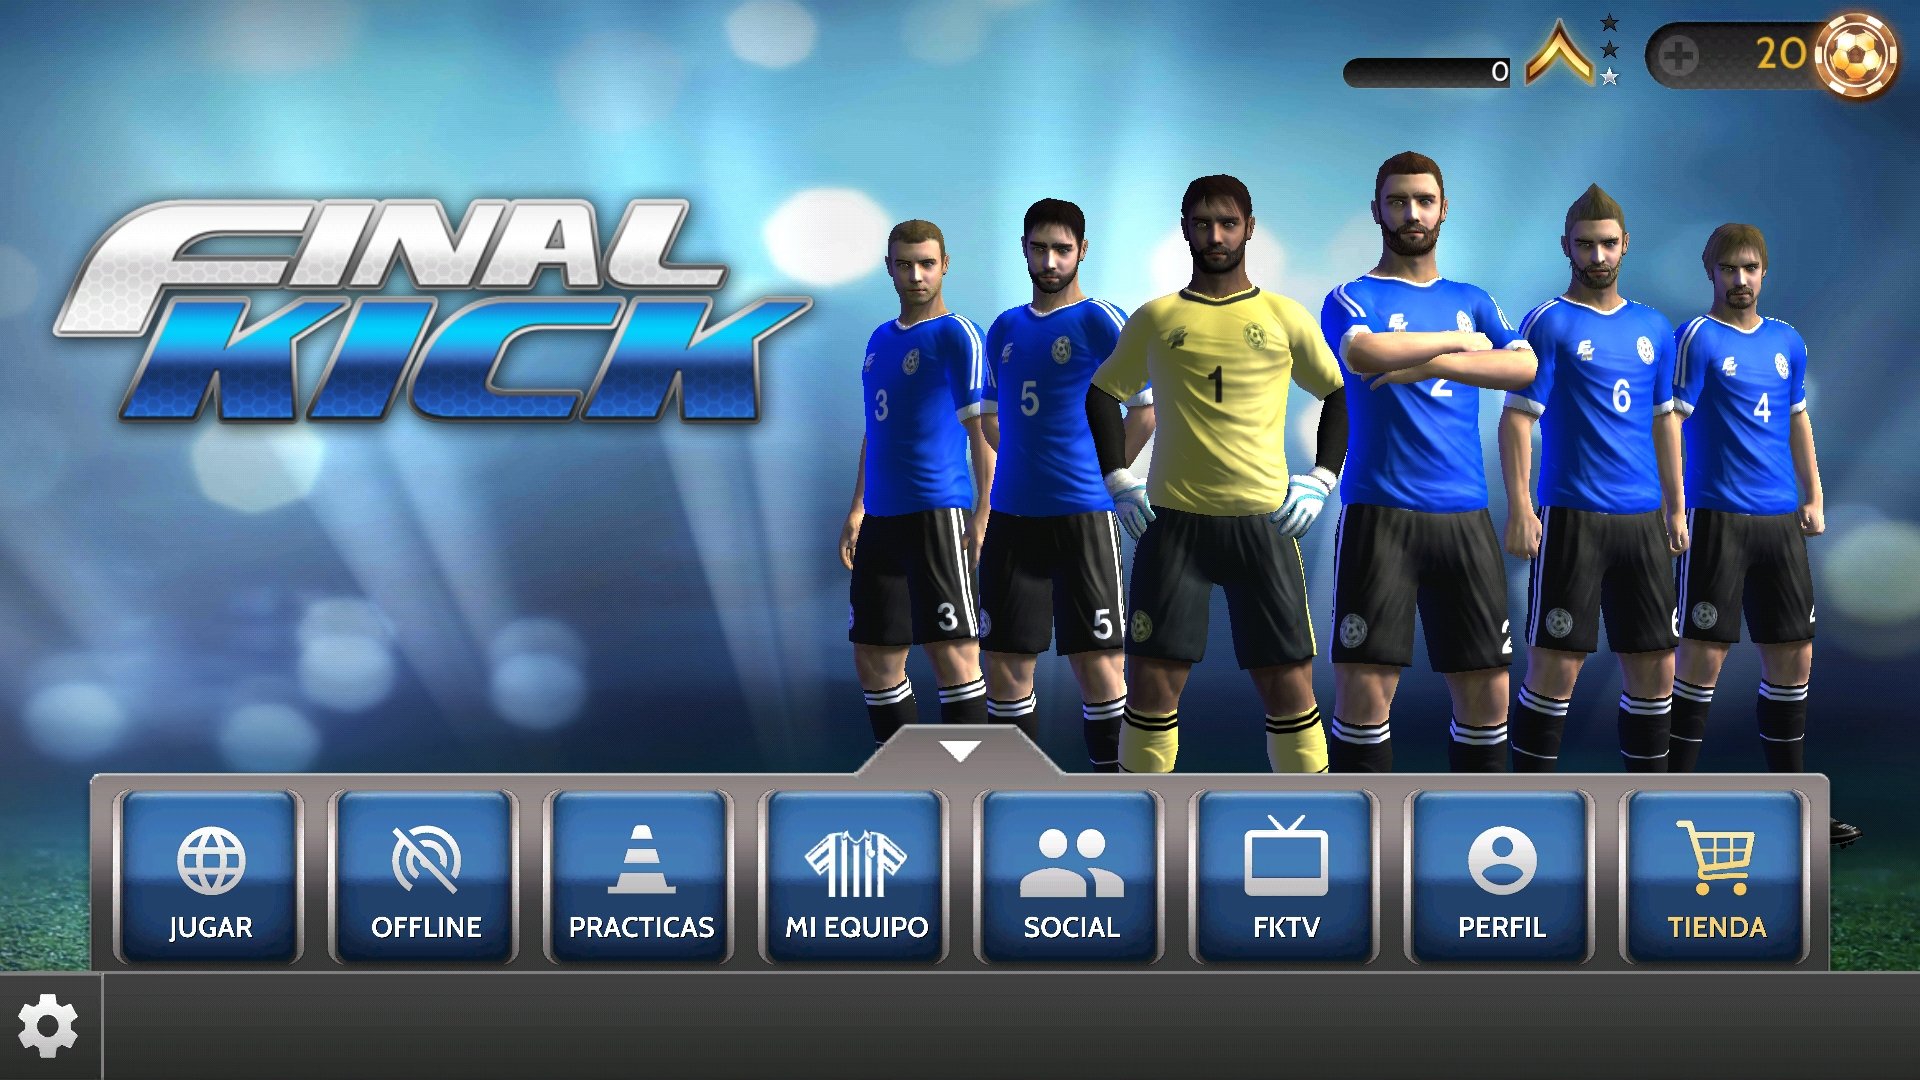 Final kick: Online football Android